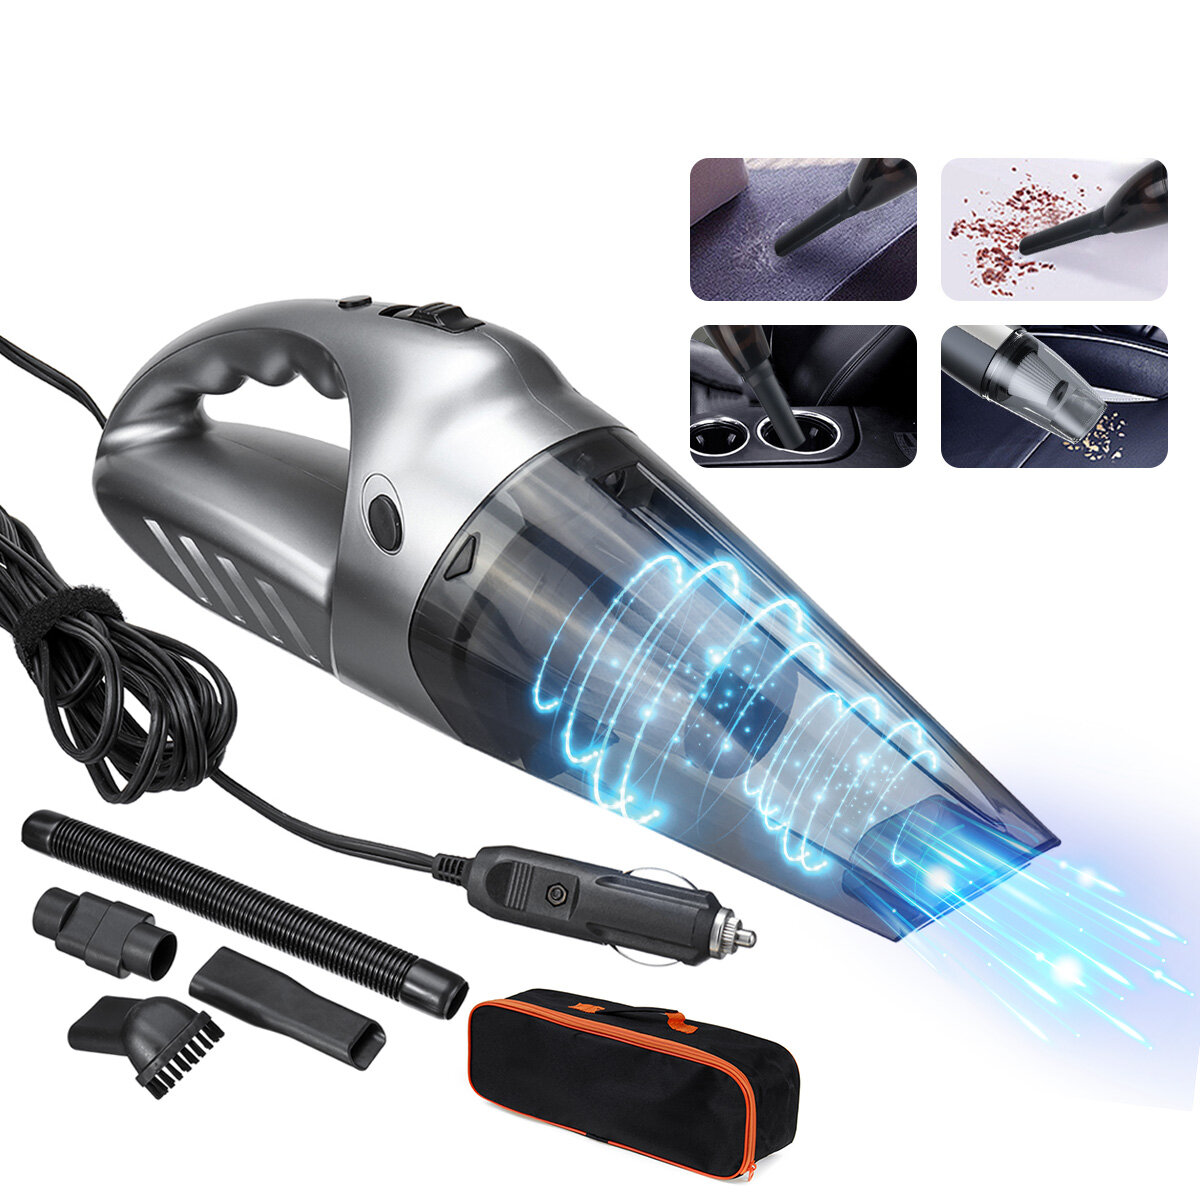 

120W Portable Auto Car Handheld Vacuum Cleaner Duster Wet & Dry Dirt Suction with LED Light